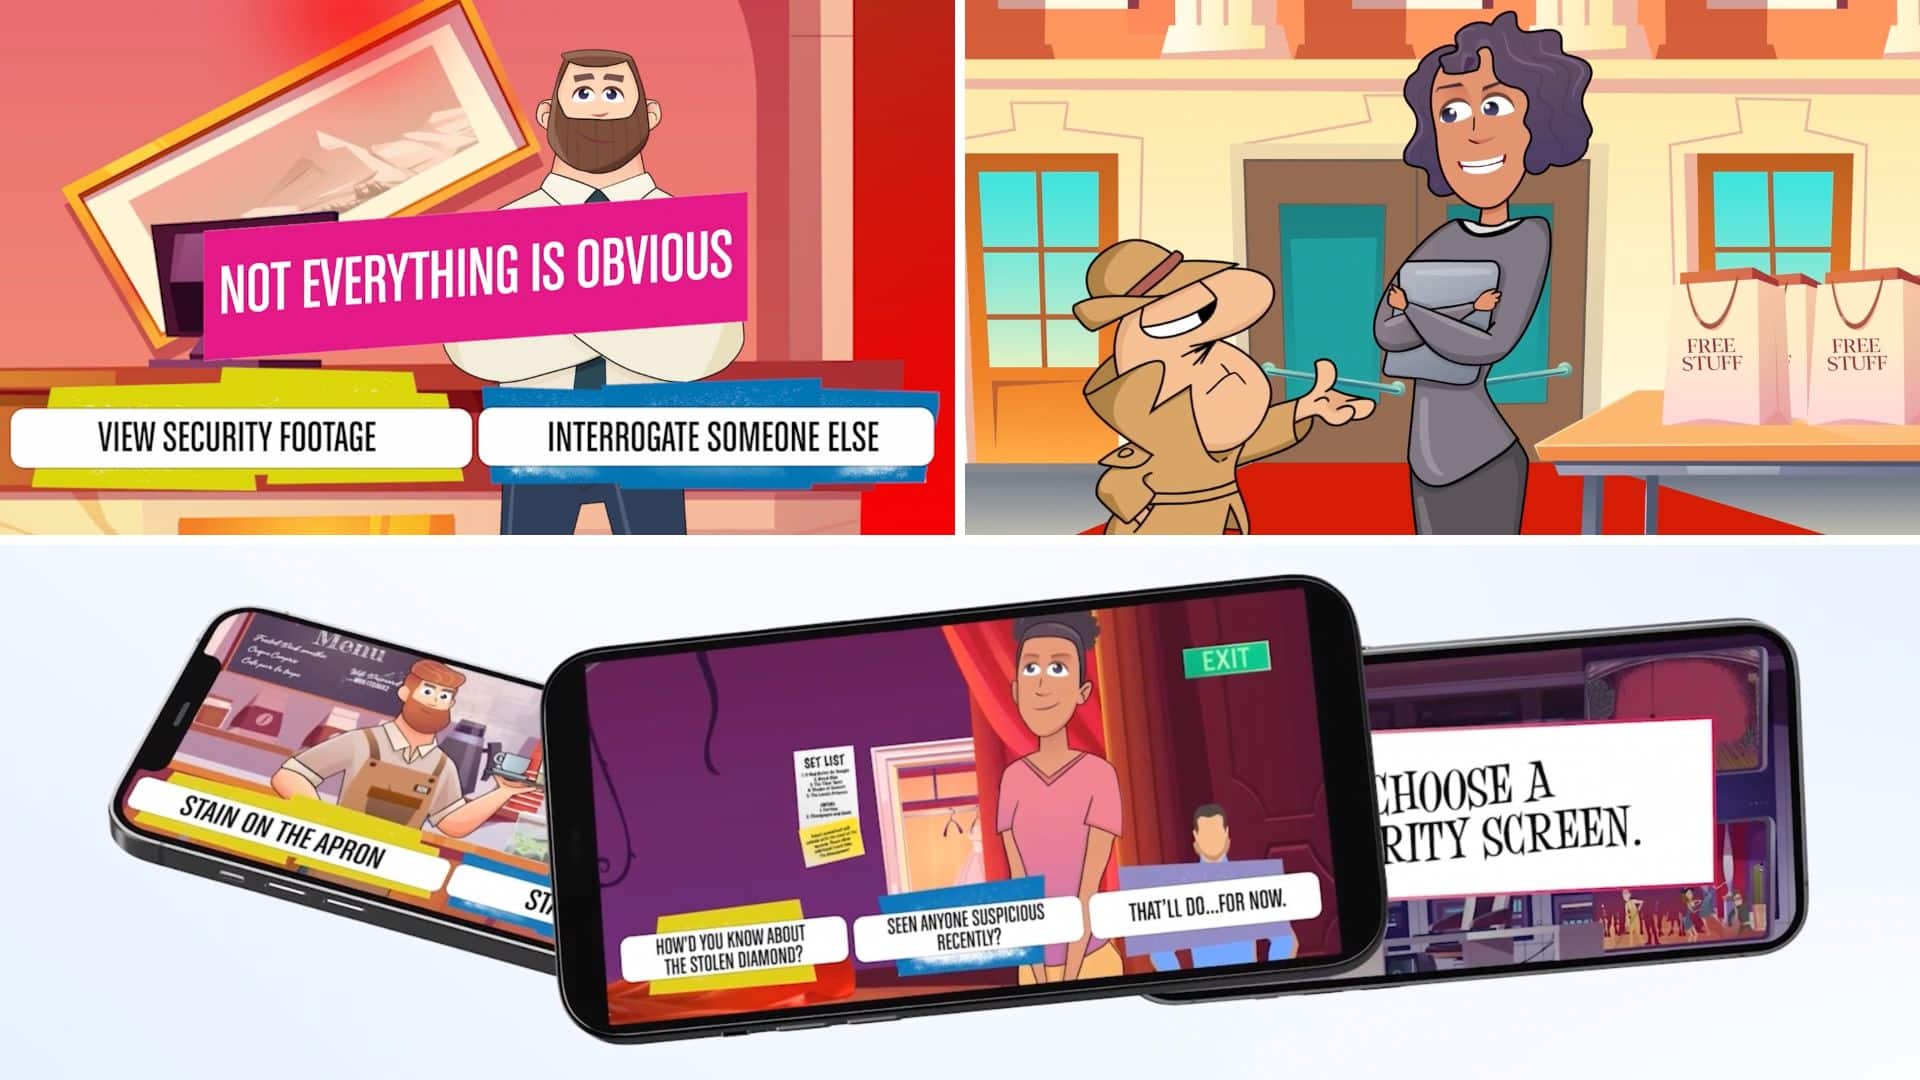 3 images taken of the Pink Panther app in action. Top left, cartoon, a man stands in front of a falling painting. The words " not everything is obvious" are in white with a pink background on the front of the screen. Underneath, there are two options: "view security footage" "integrate someone else" Top right - cartoon - a short moustached man wears a beige trench coat and hat. He looks questioningly at a tall woman wearing grey. Bottom - three smartphones each show a snippet of the pink panther experience